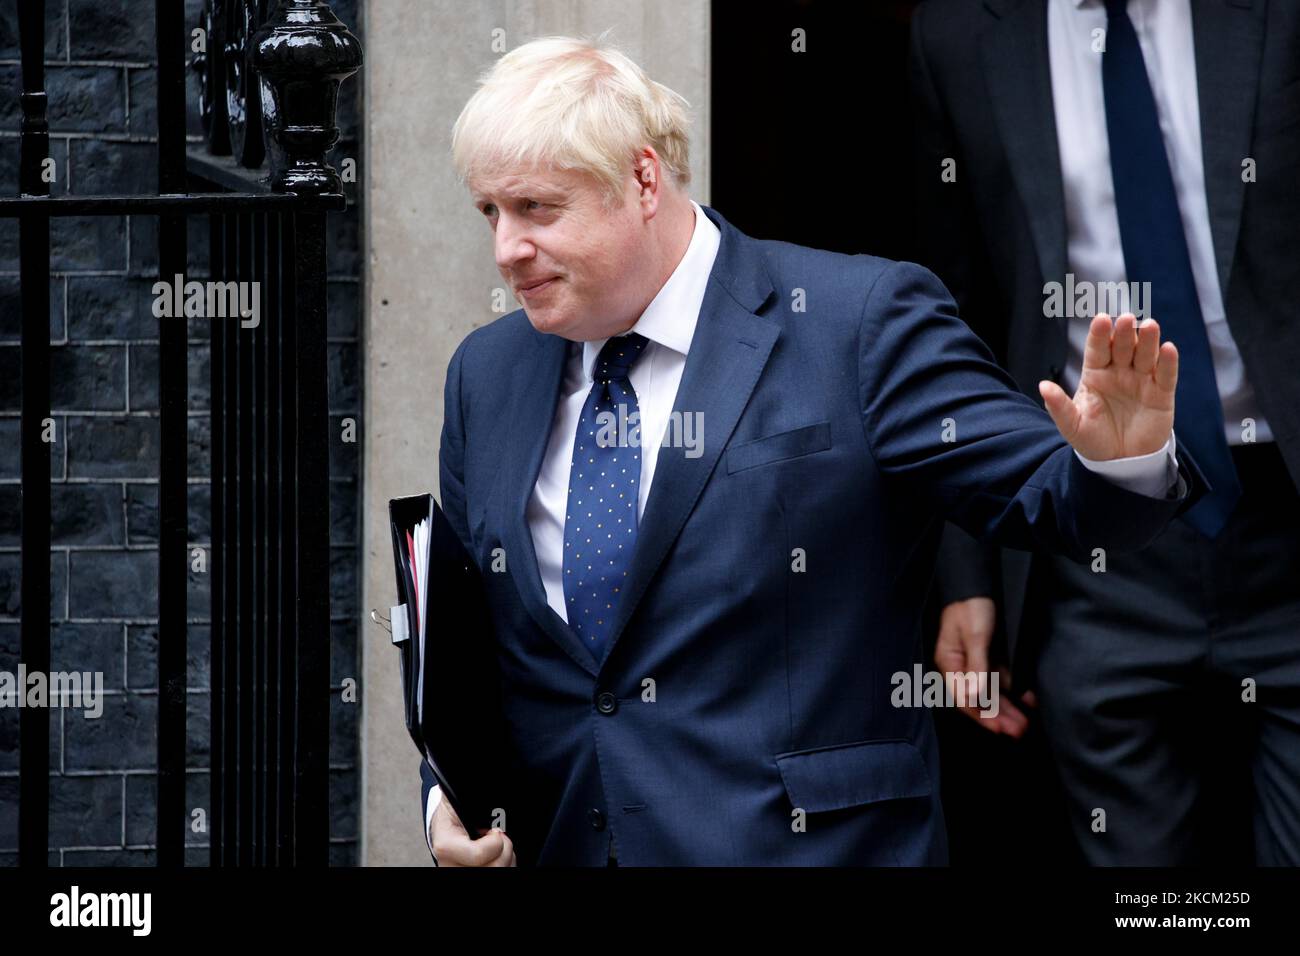 British Prime Minister Boris Johnson leaves 10 Downing Street to deliver a statement on Afghanistan to MPs in the House of Commons in London, England, on September 6, 2021. (Photo by David Cliff/NurPhoto) Stock Photo